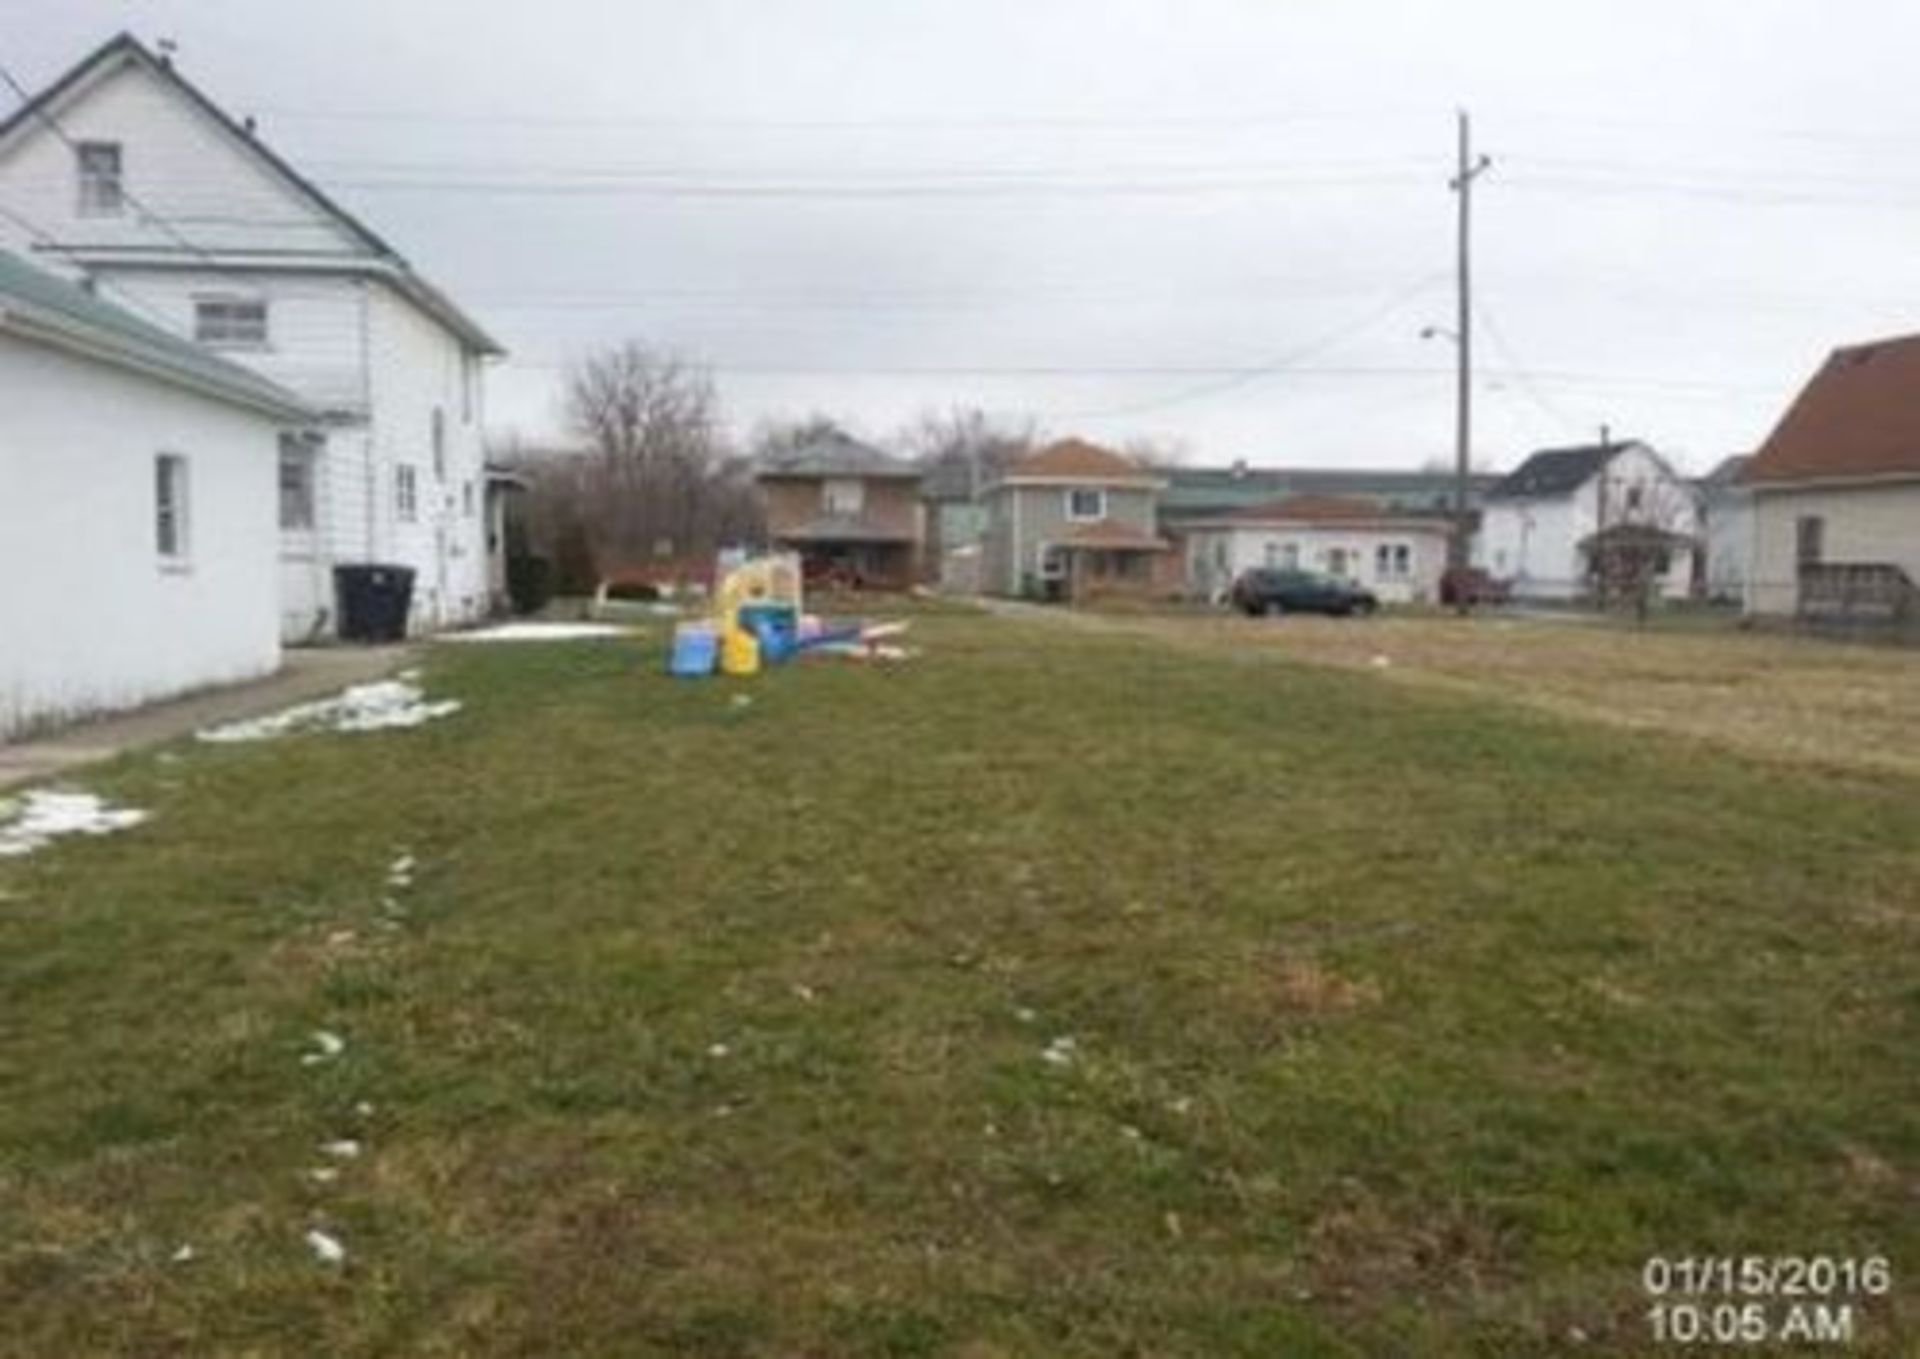 PLOT OF LAND AT 1303 E MARKET, HUNTINGTON, INDIANA. USA!   YOU ARE BIDDING ON THE FULL PURCHASE